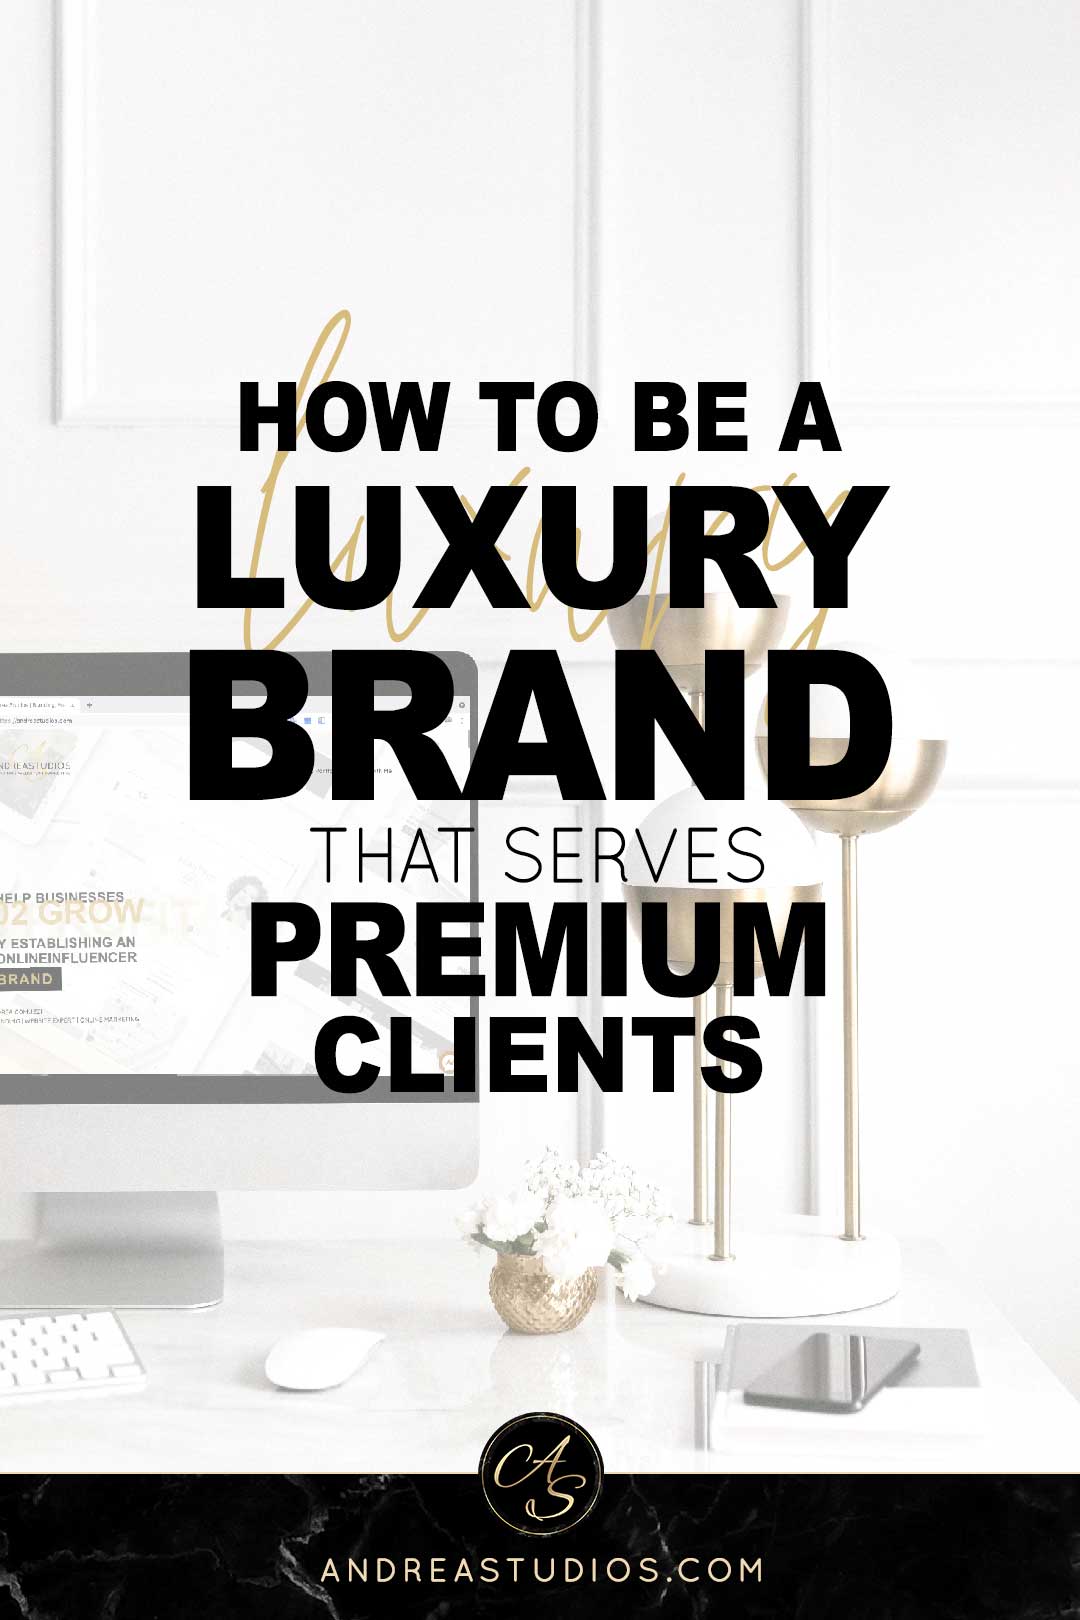 How to Be a Luxury Brand that Serves Premium Clients